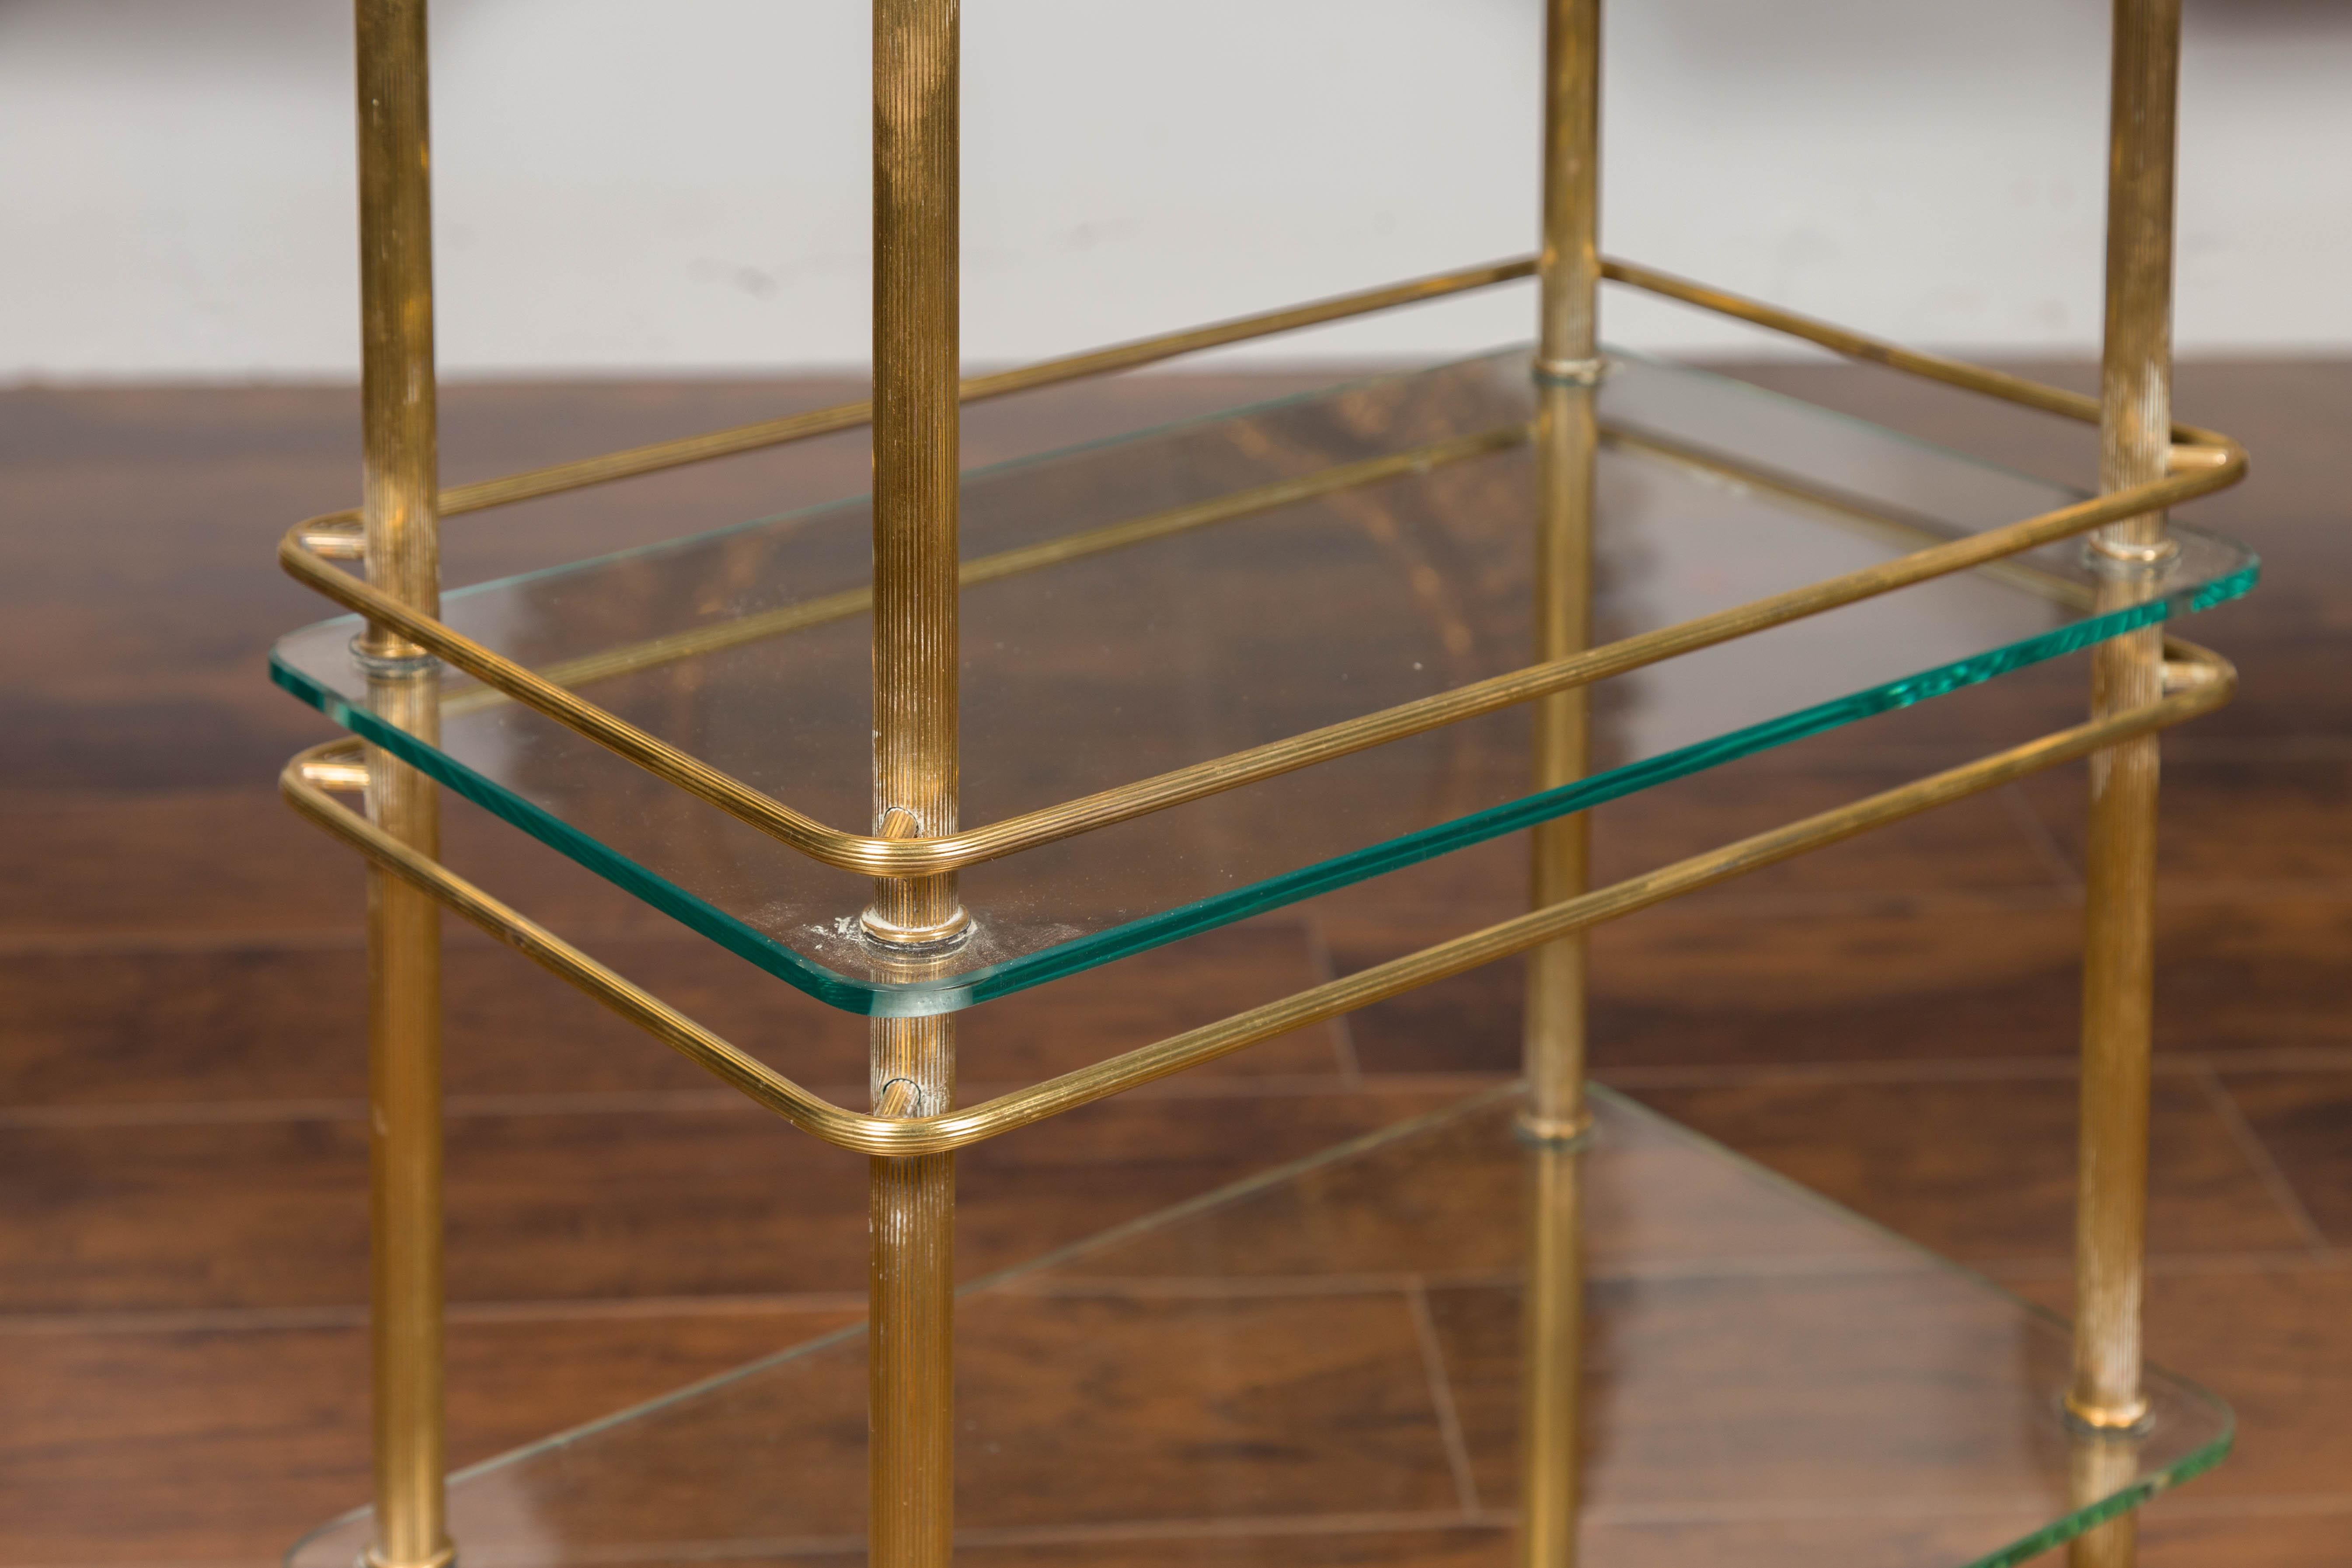 Italian Midcentury Tiered Brass Side Table with Glass Shelves and Petite Finials 3